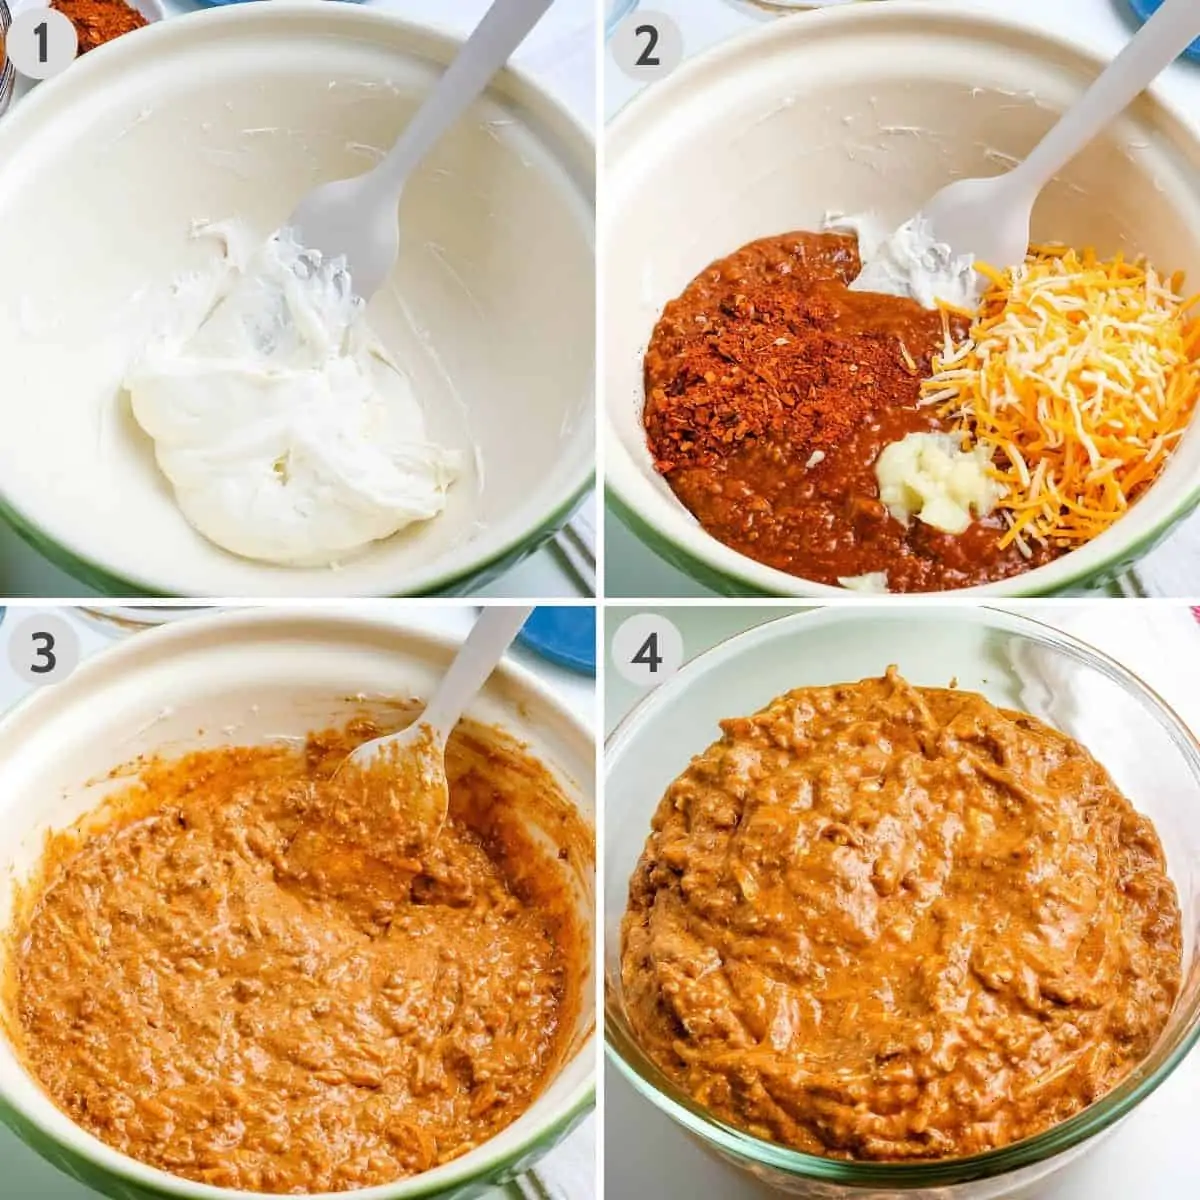 steps for how to make chili cheese dip in green mixing bowl, including 1: whisking cream cheese, 2: adding chili, taco seasoning, garlic, and cheese, 3: stirring everything together, and 4: transferring mixture to microwave-safe bowl.